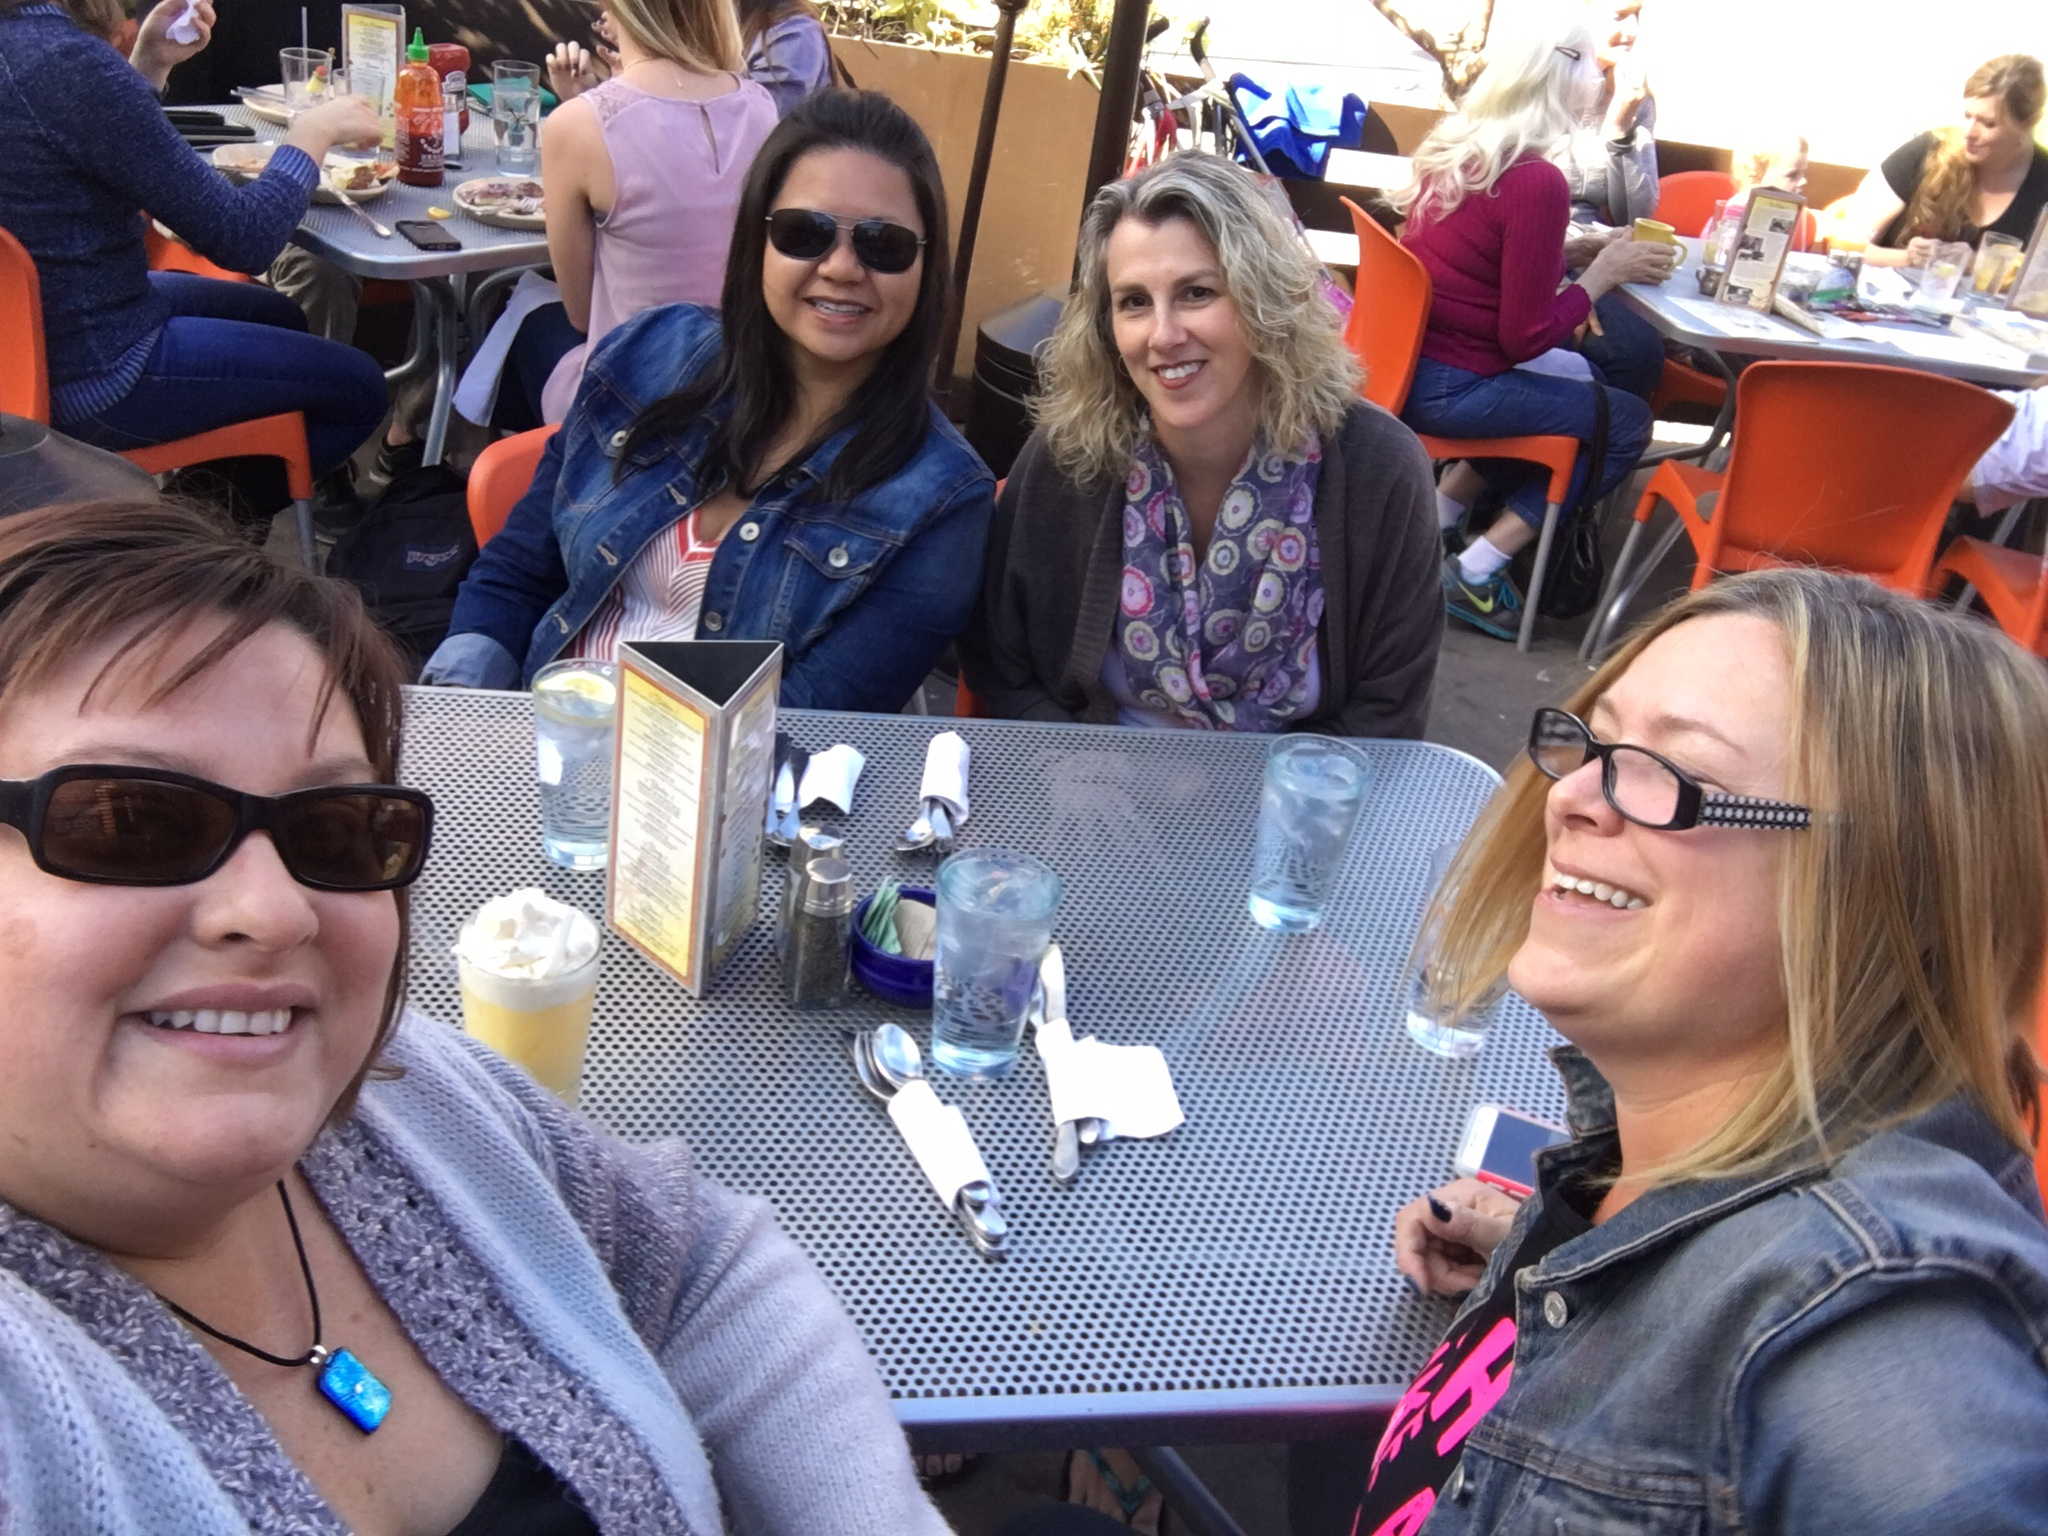 Phoenix to Arizona, where to go to escape the cold winter weather in the Pacific Northwest. Ladies having lunch! 